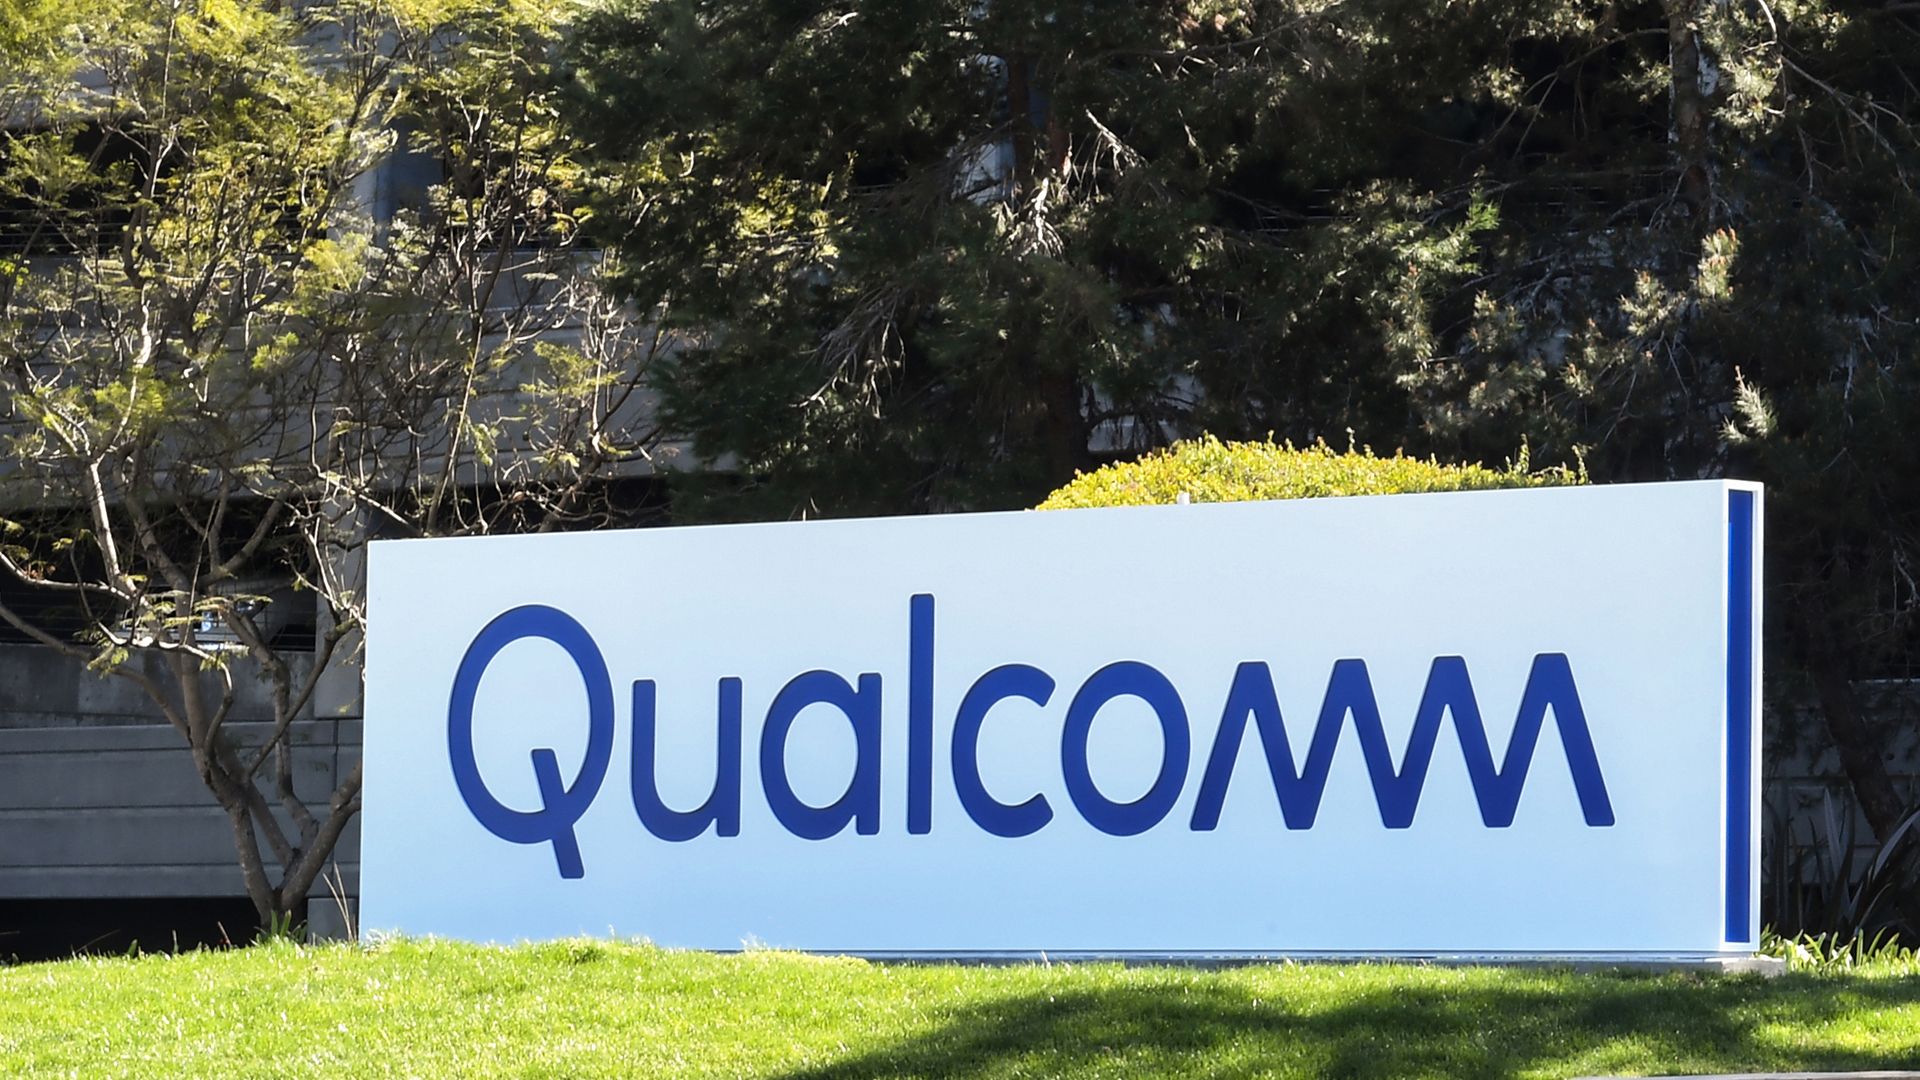 A startup founded by former Apple Executives was acquired by Qualcomm